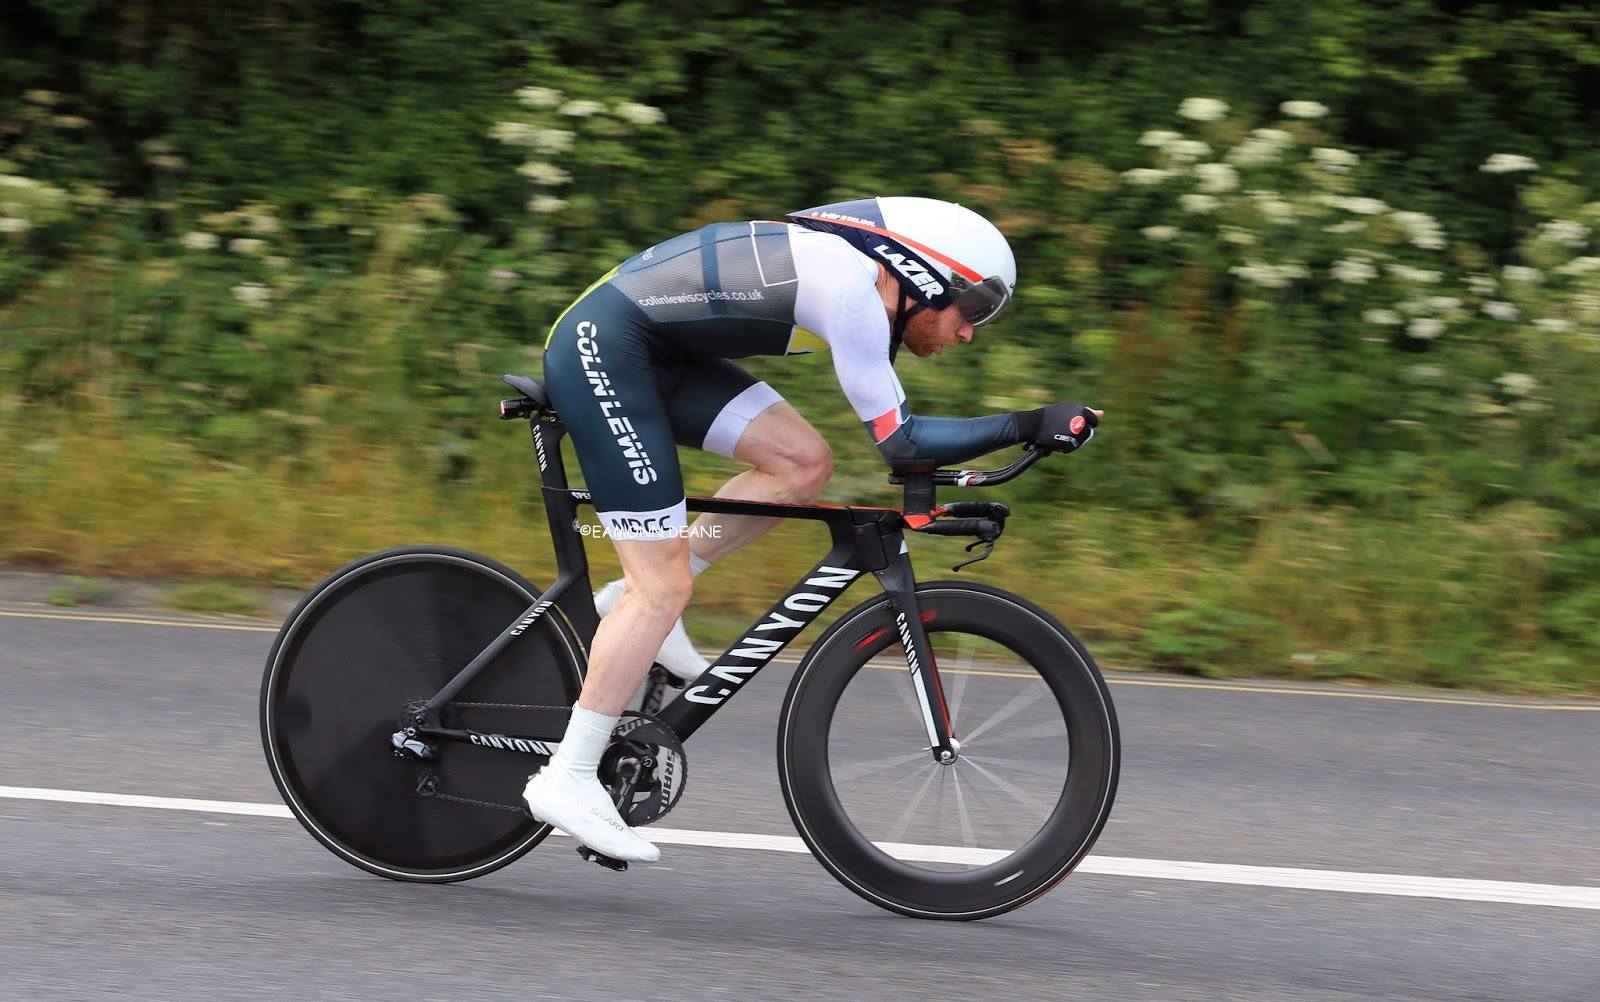 Race Report – St Austell Wheelers 25 TT – 3 on the bounce for Conrad